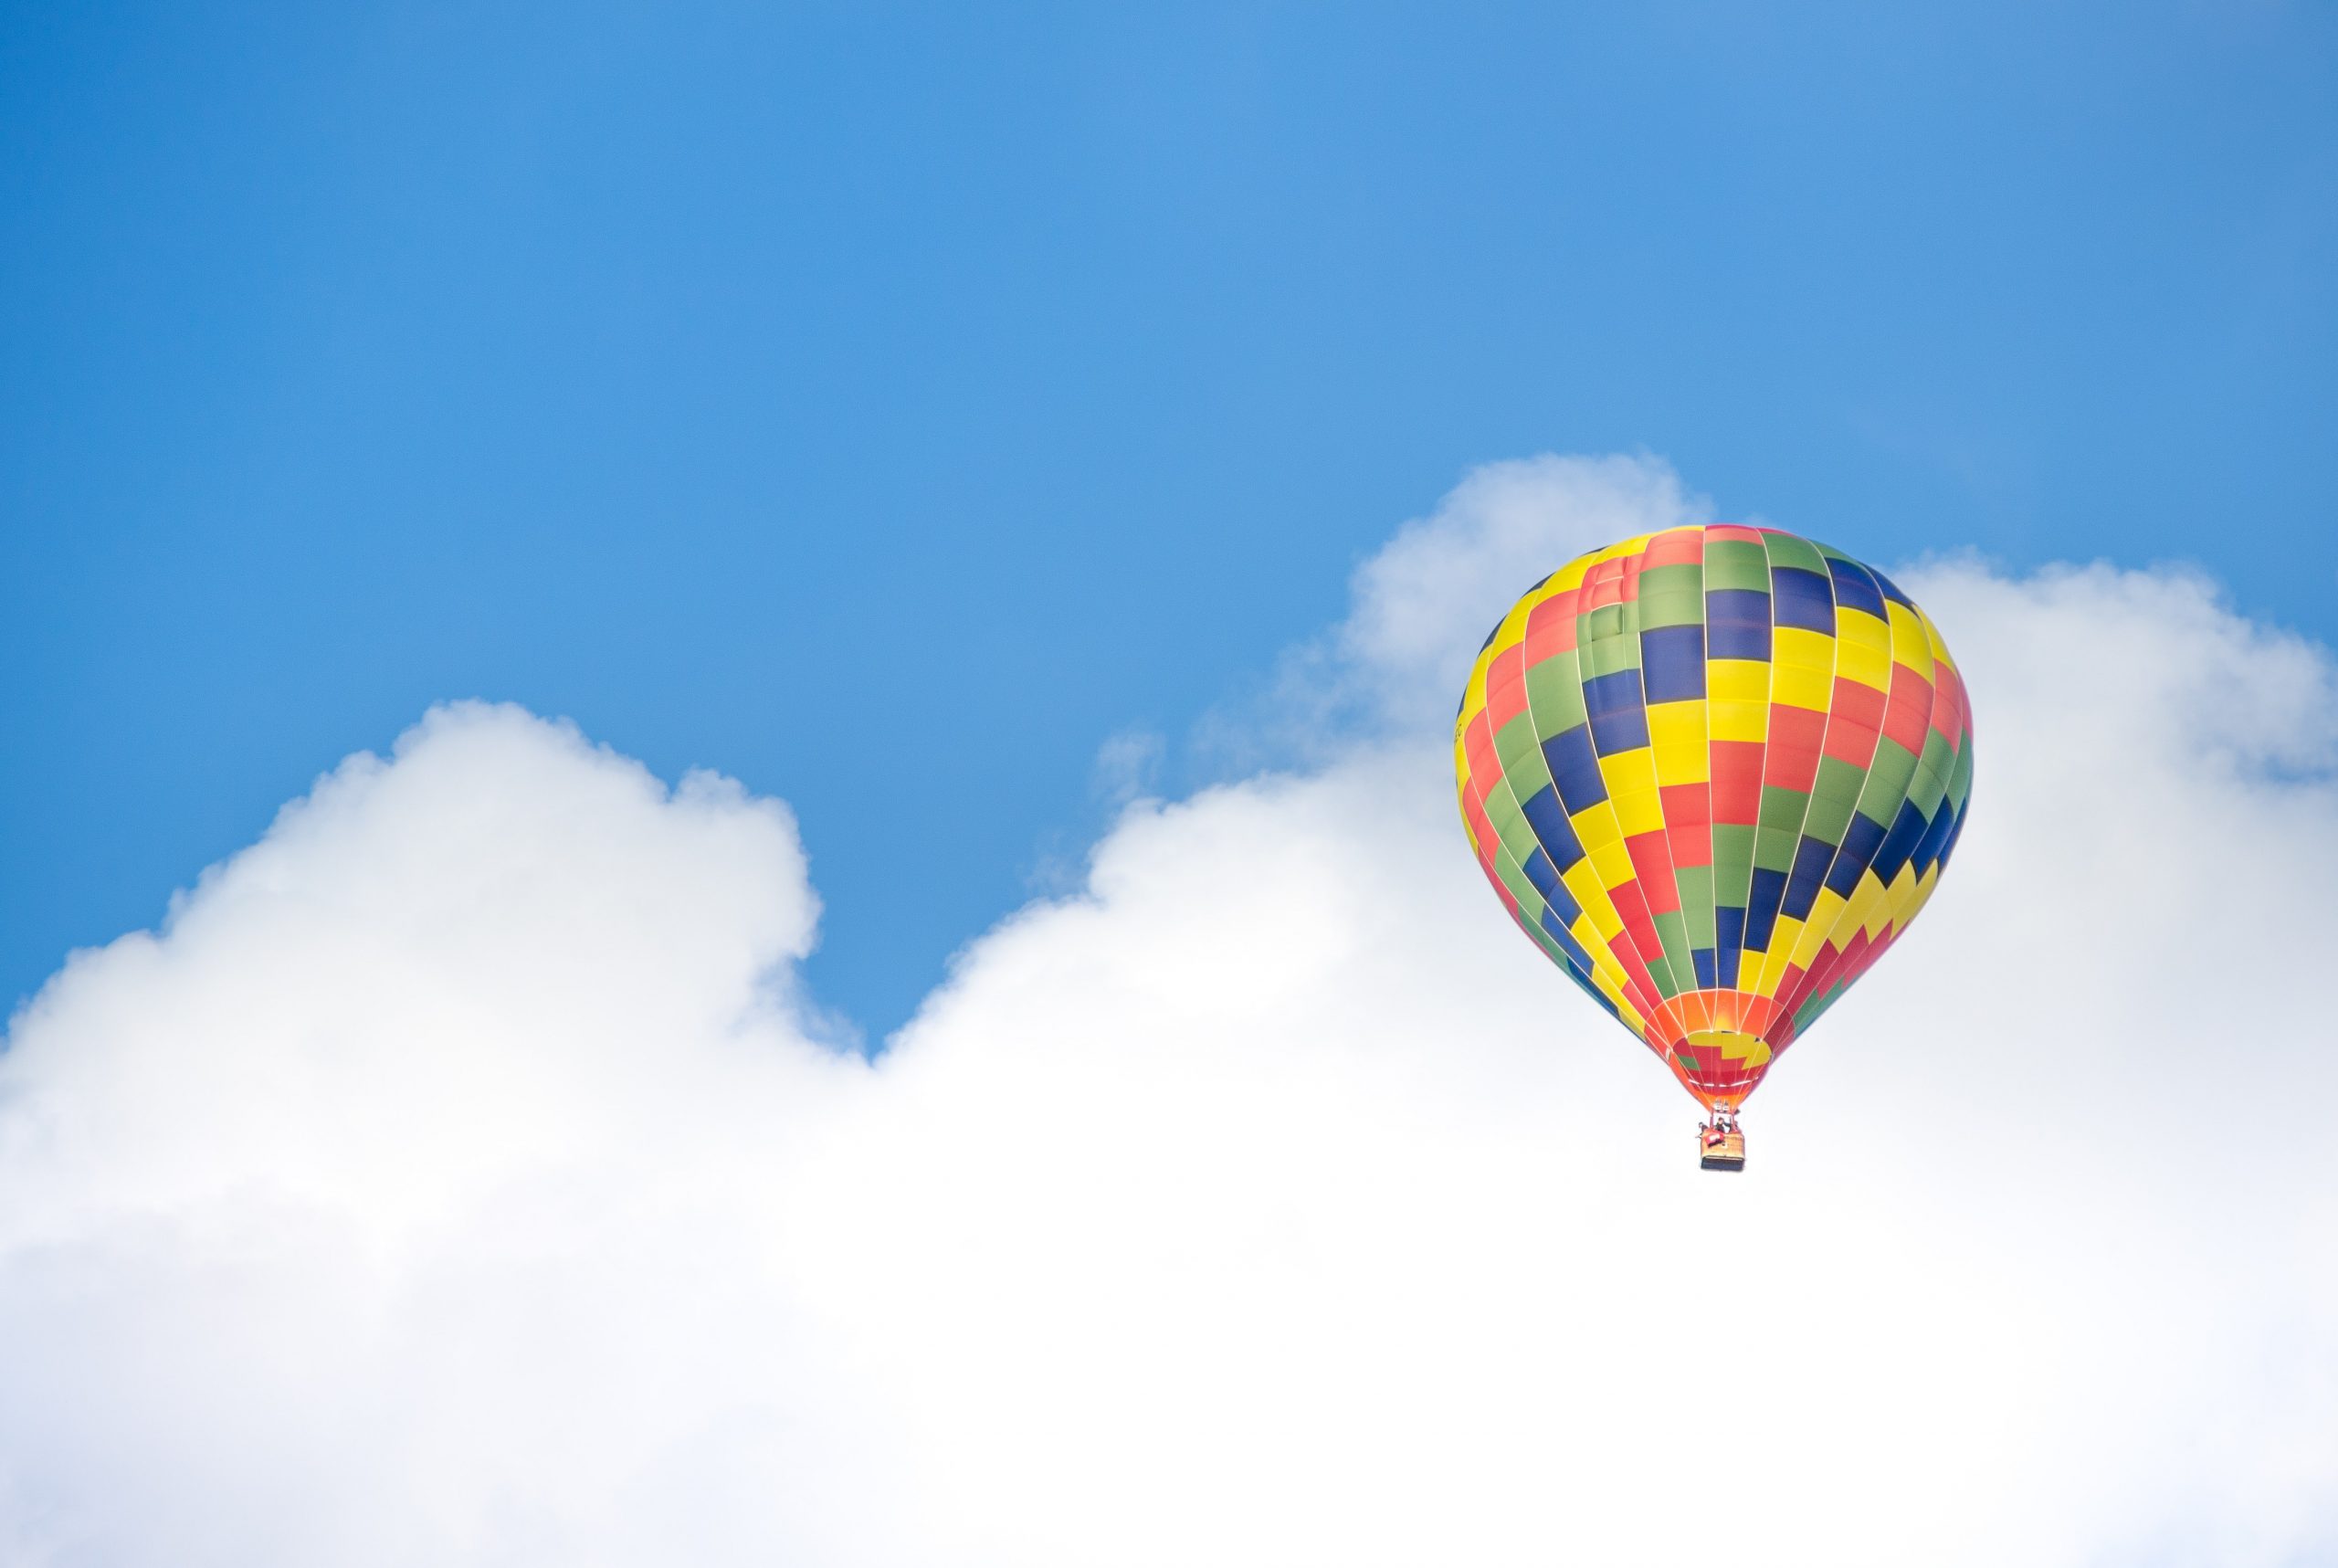 yellow-blue-and-green-hot-air-balloon-flying-near-white-68806